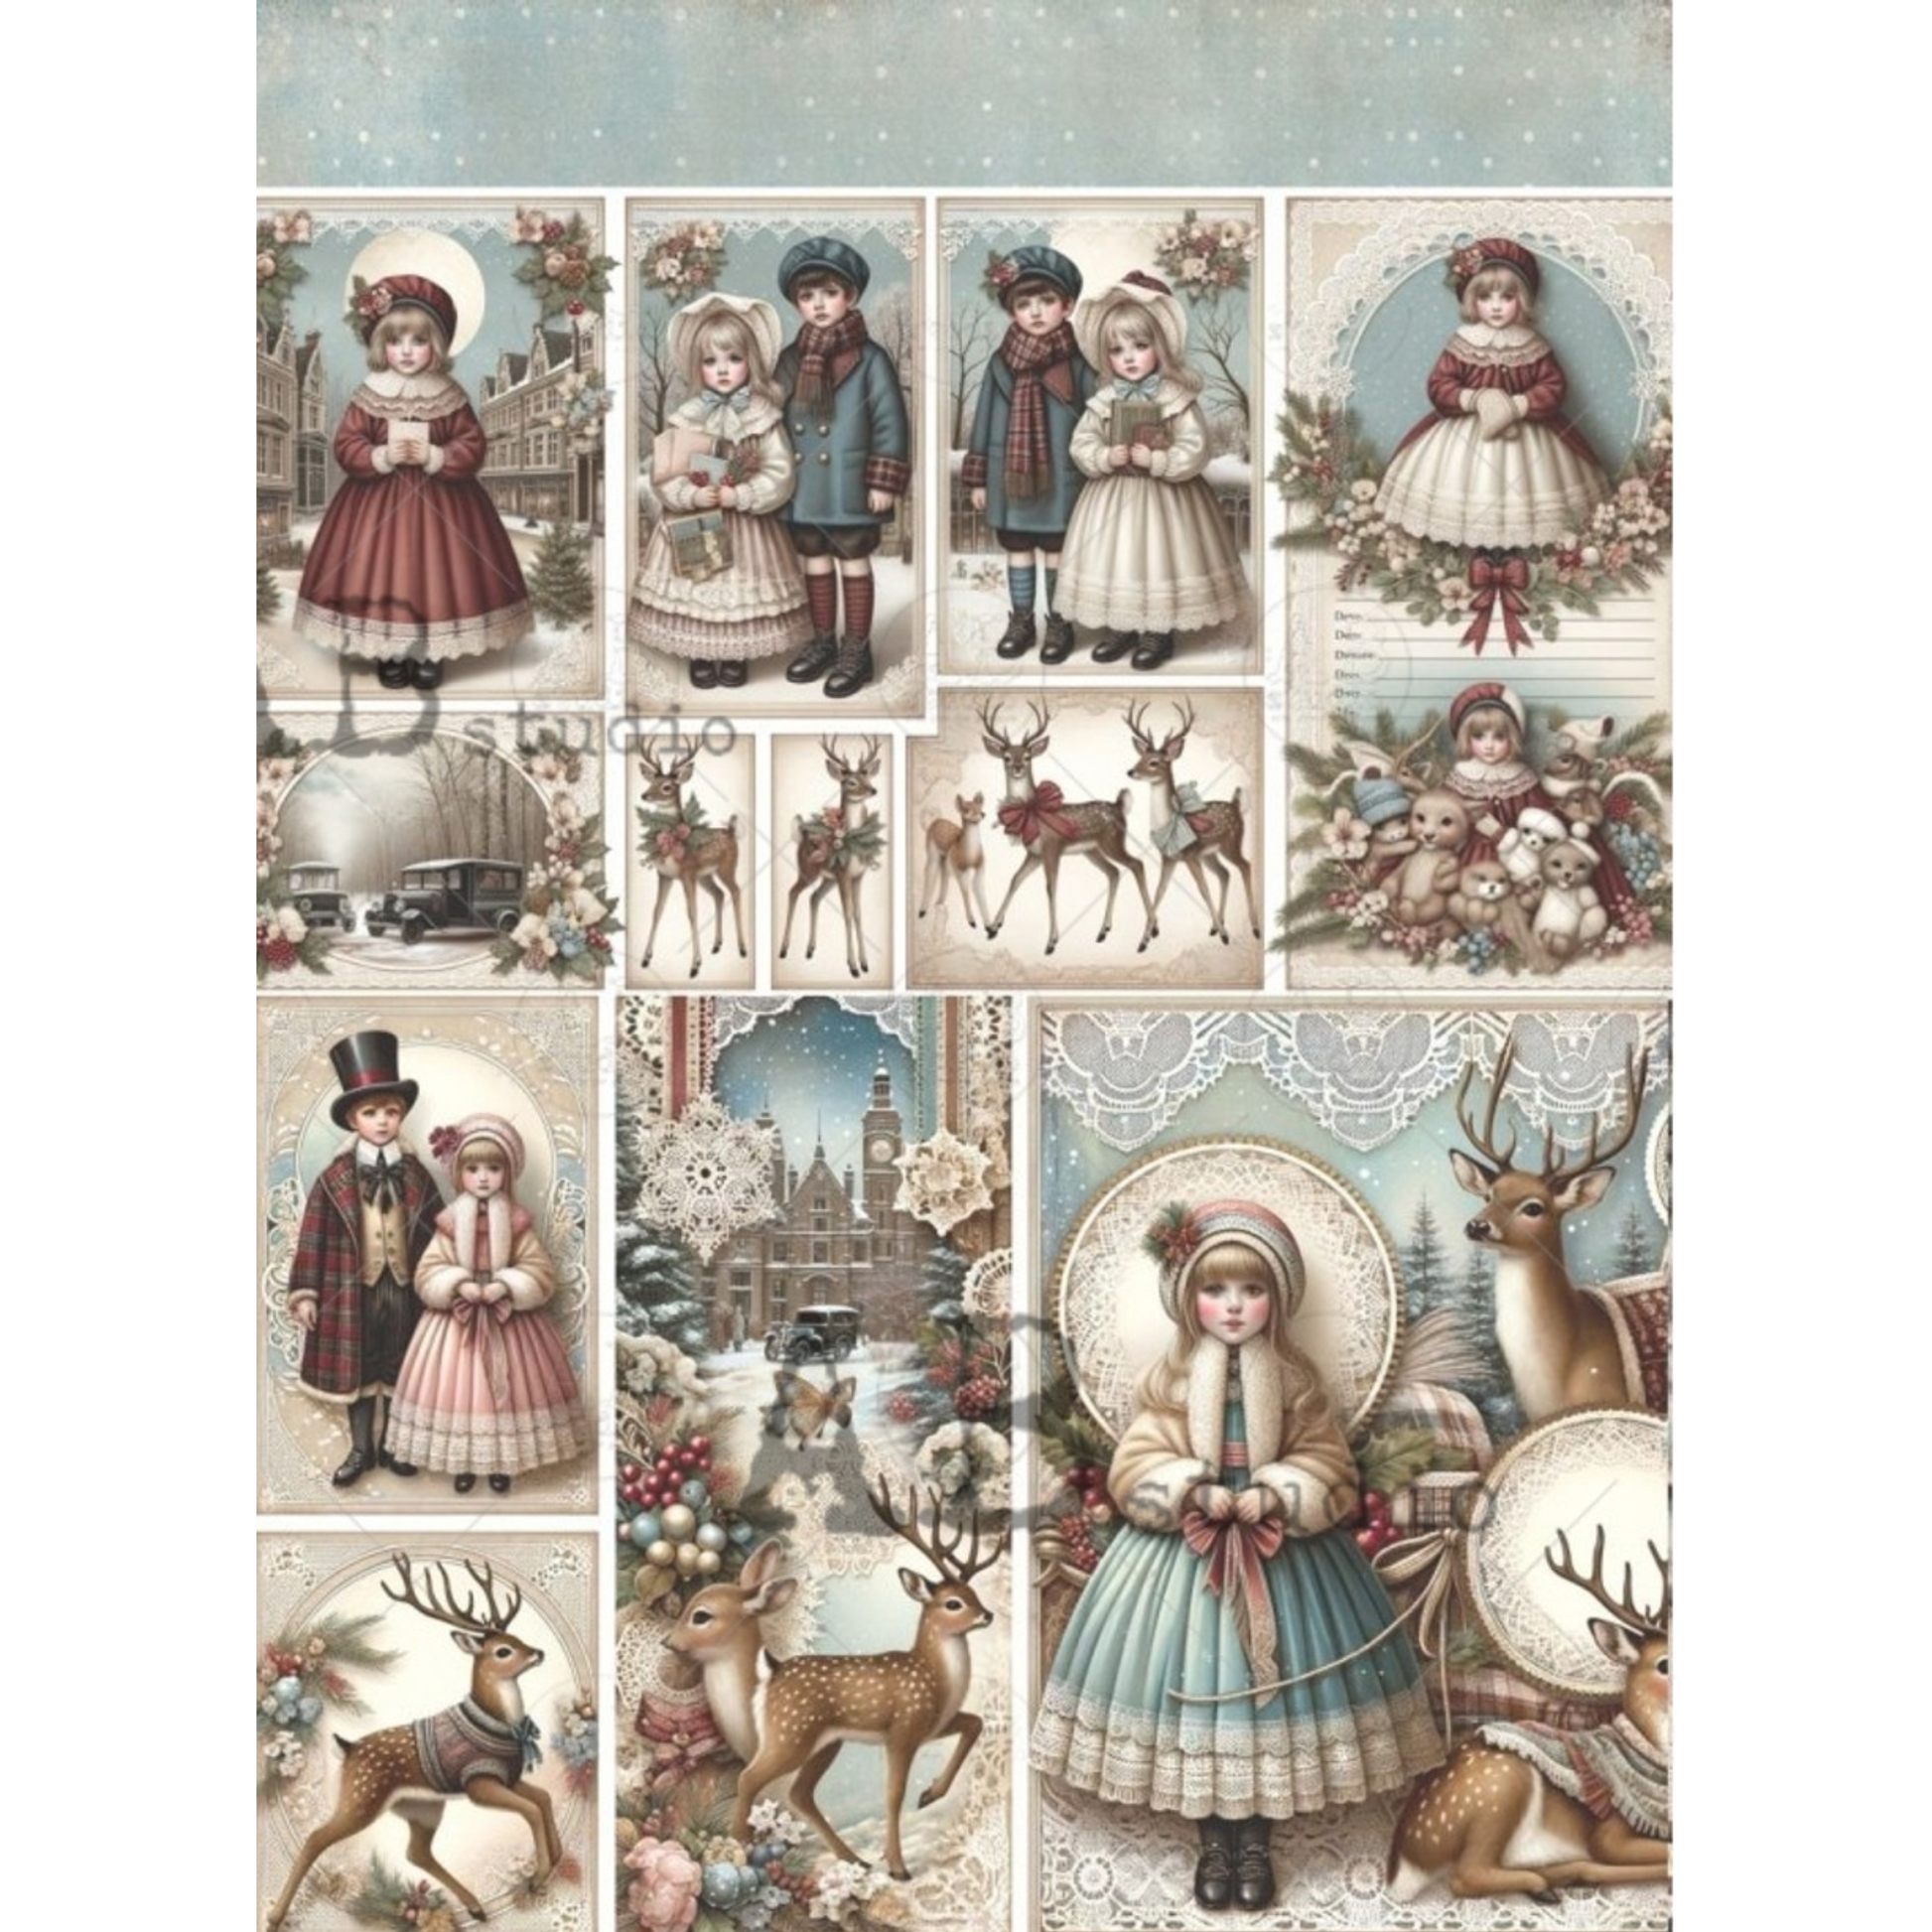 "Mini Scenes Christmas & Reindeer" decoupage rice paper by AB Studio. Available at Milton's Daughter.